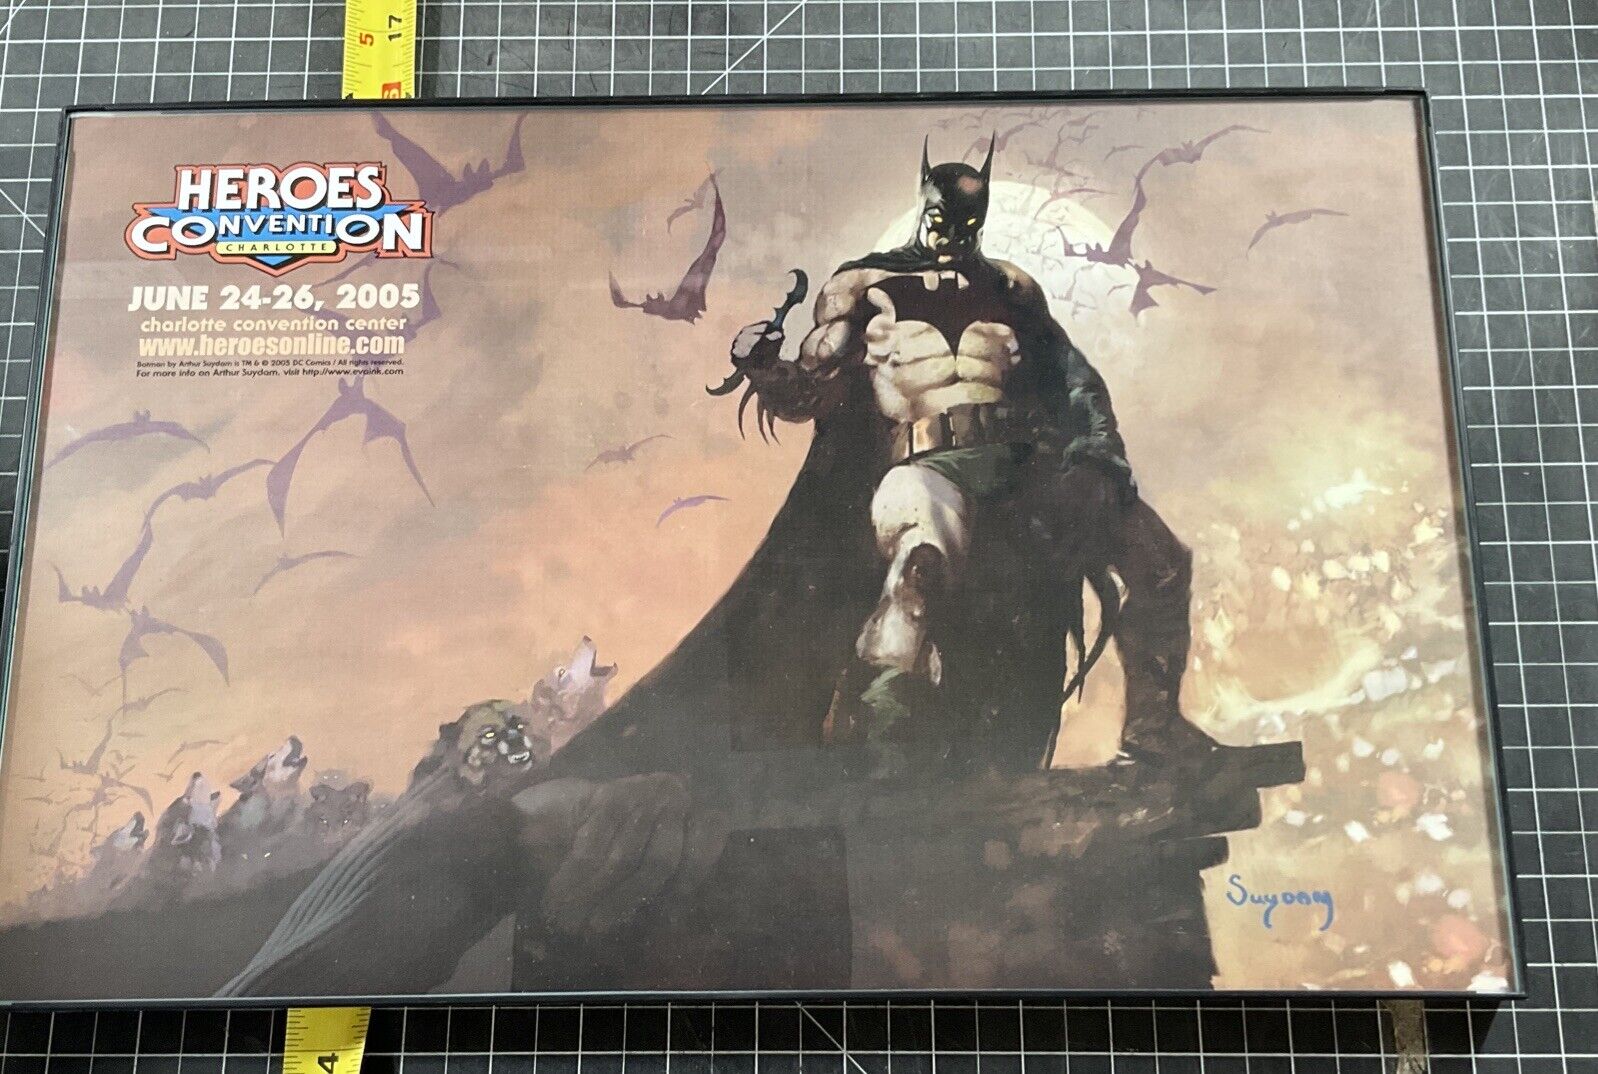 Heroes Convention Charlotte 2005 Batman Promotional Poster